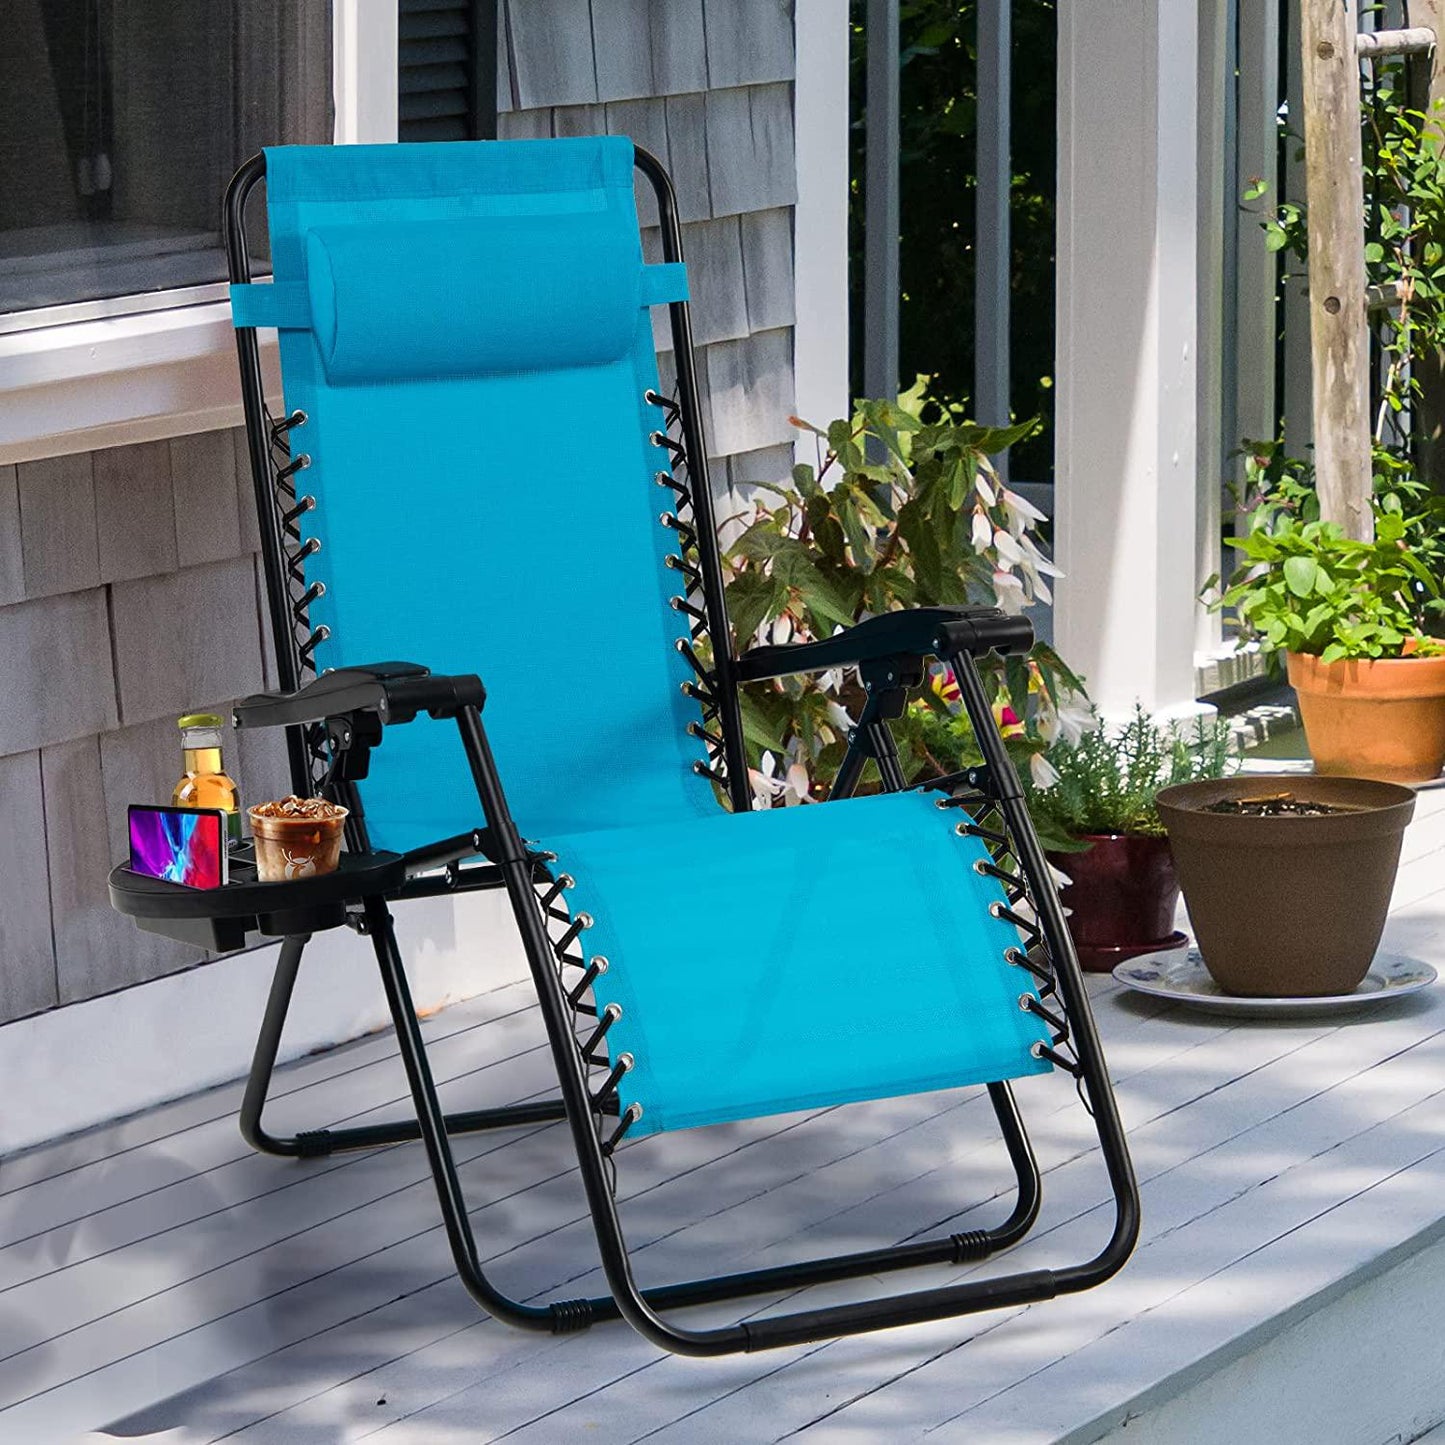 Zero Gravity Chair, Adjustable Folding Reclining Lounge Chair with Pillow and Cup Holder, Patio Lawn Recliner for Outdoor Pool Camp Yard (Set of 2, Light Blue)